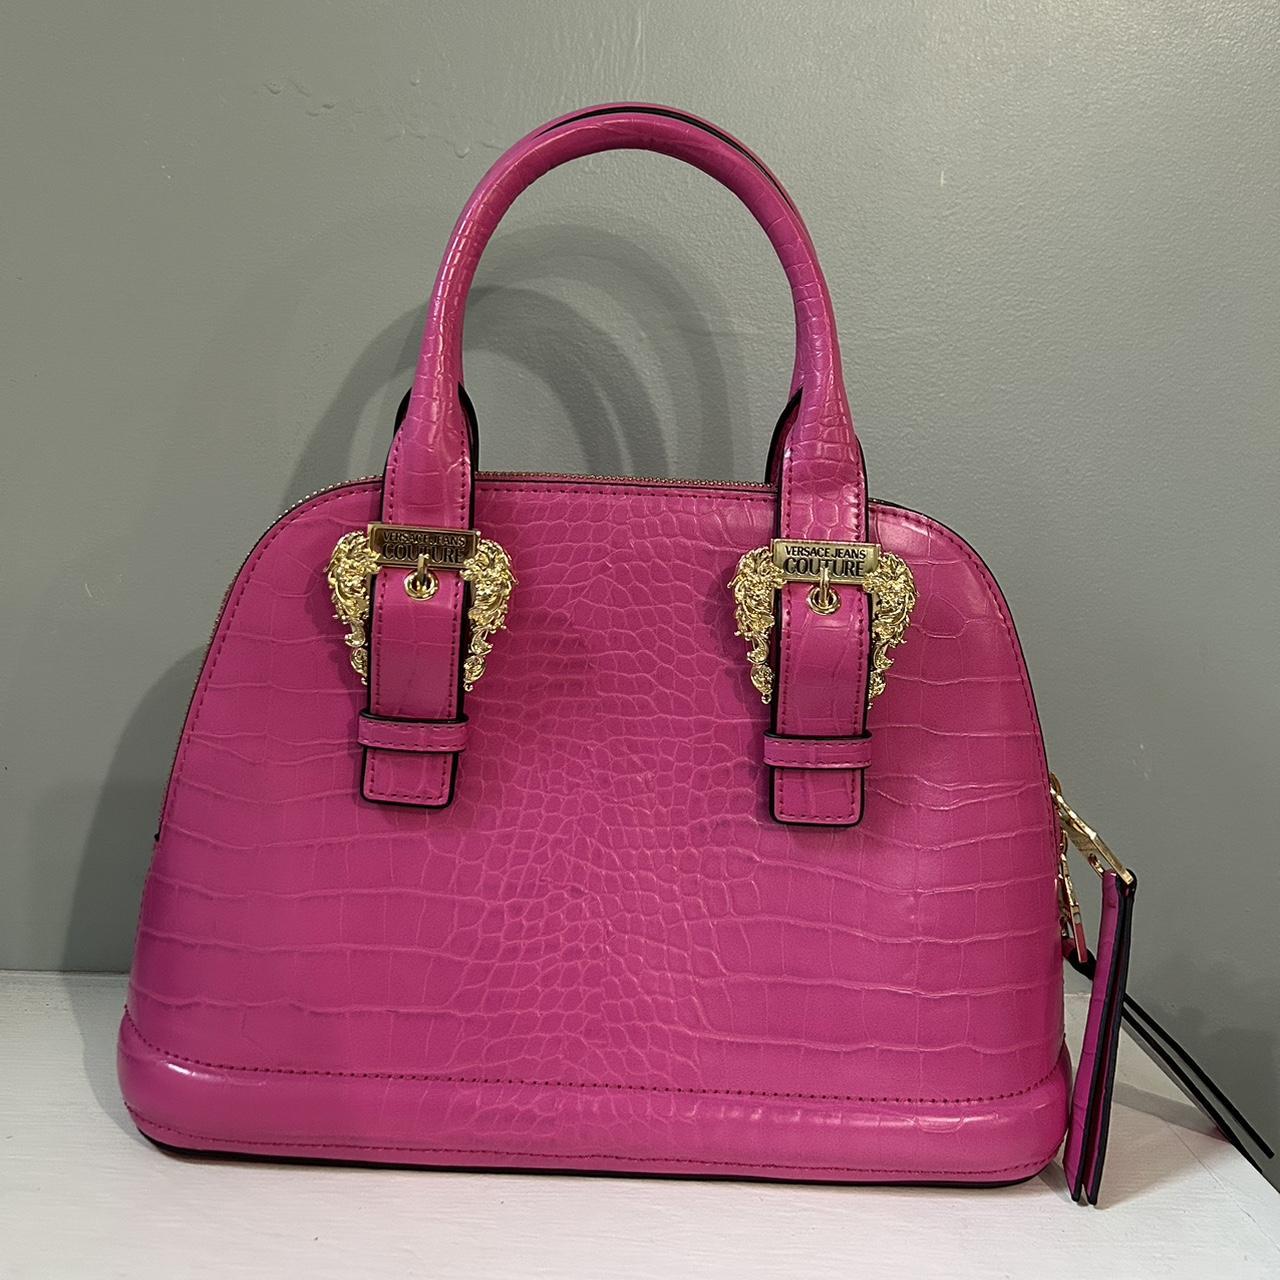 Bags from Versace for Women in Pink